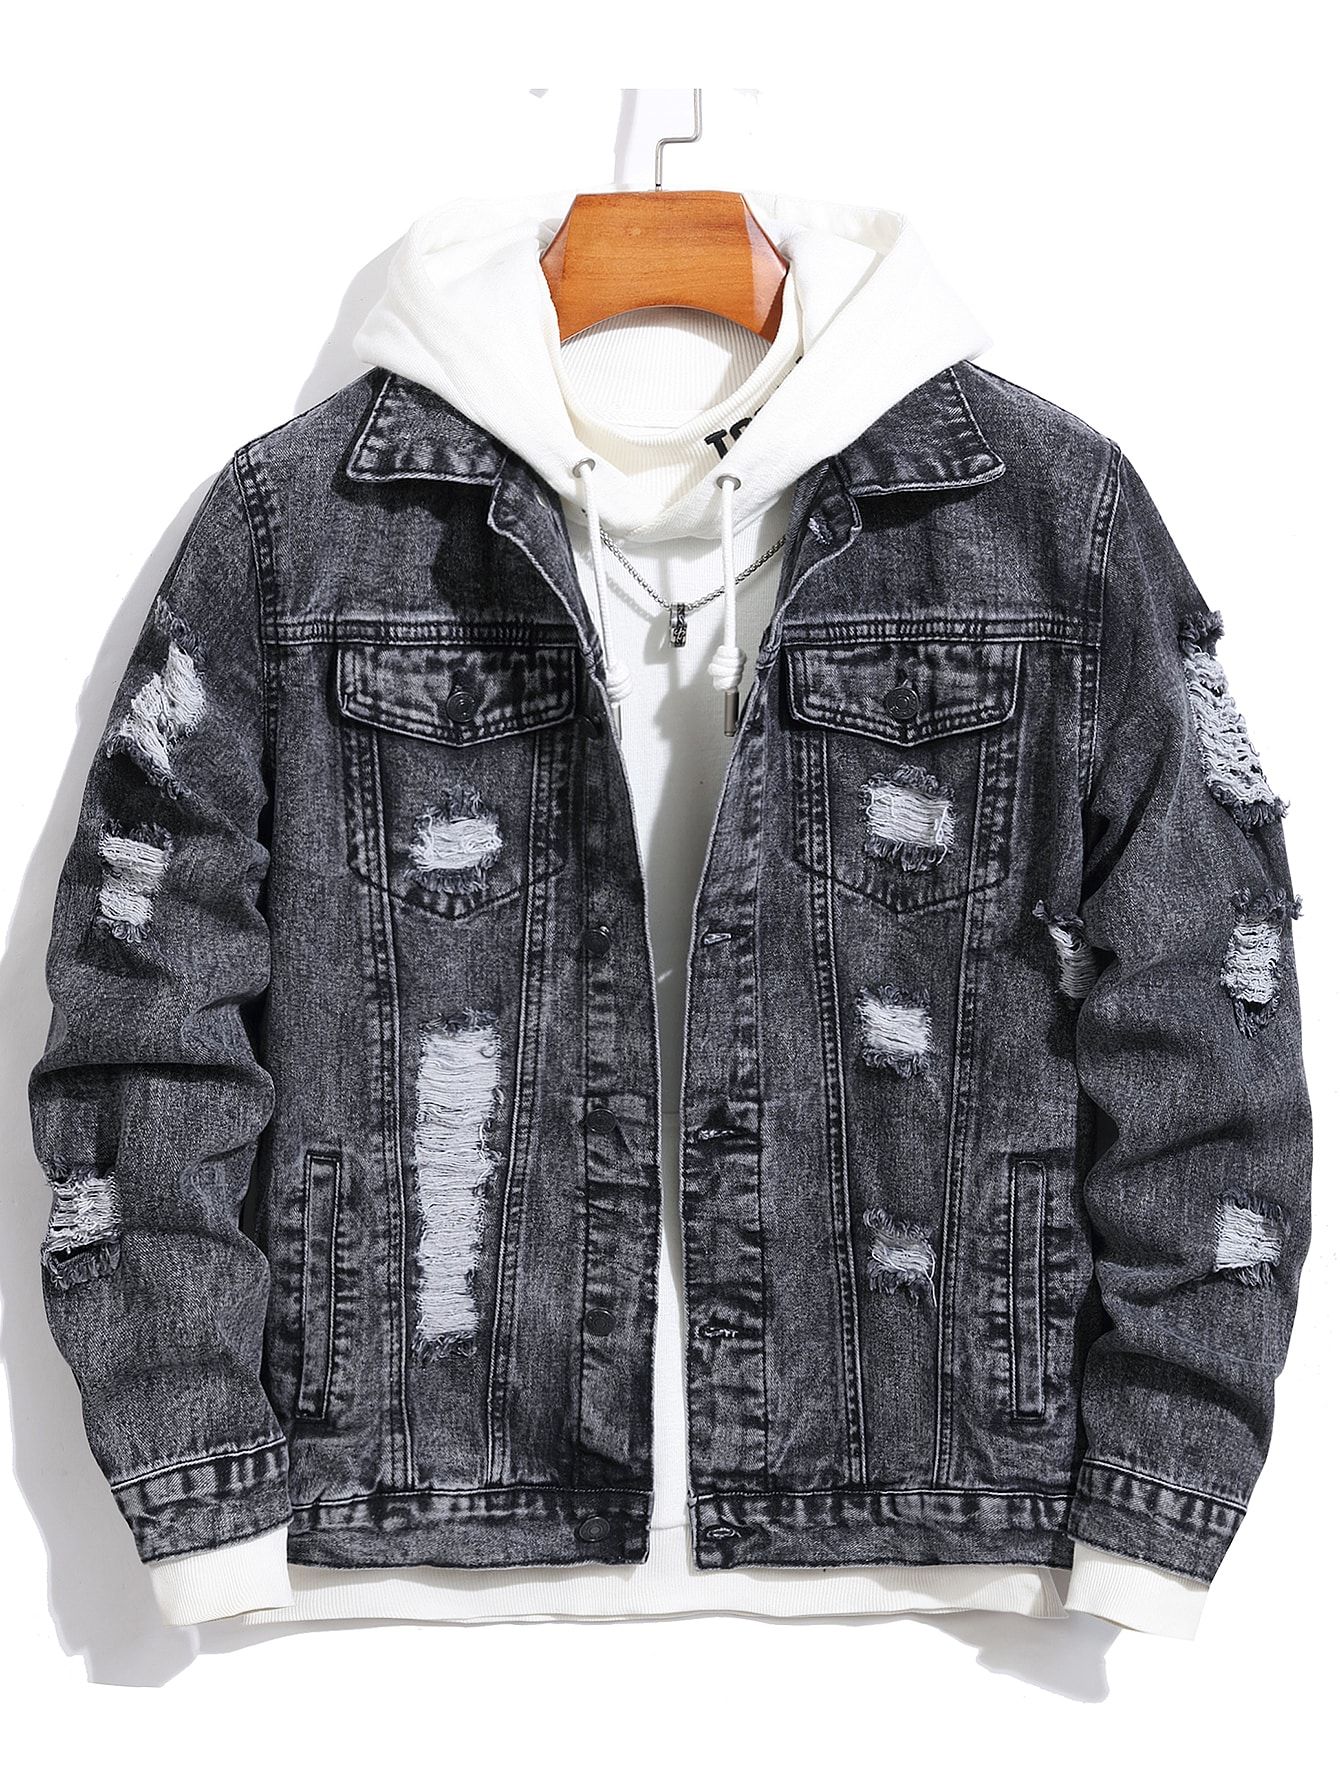 Mens Jean Jacket A Casual Choice With
Cool Effects